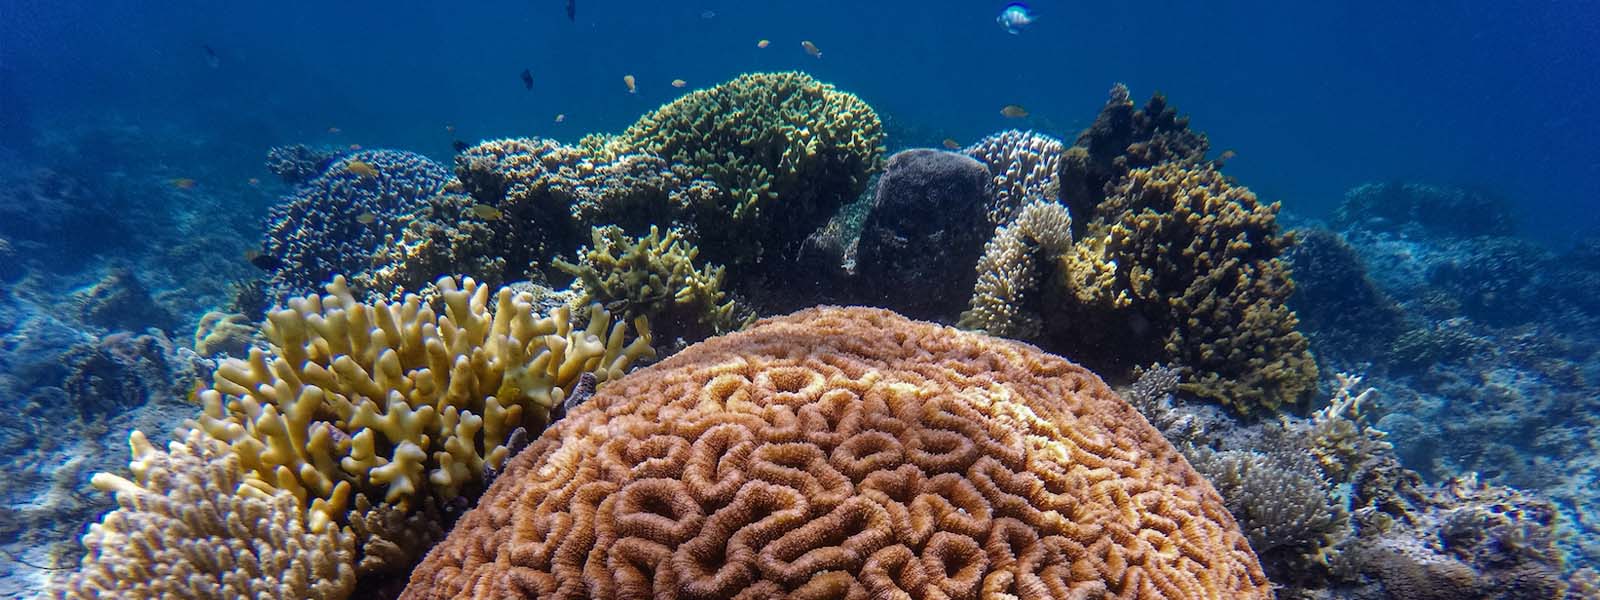 Hope for the world's coral reefs